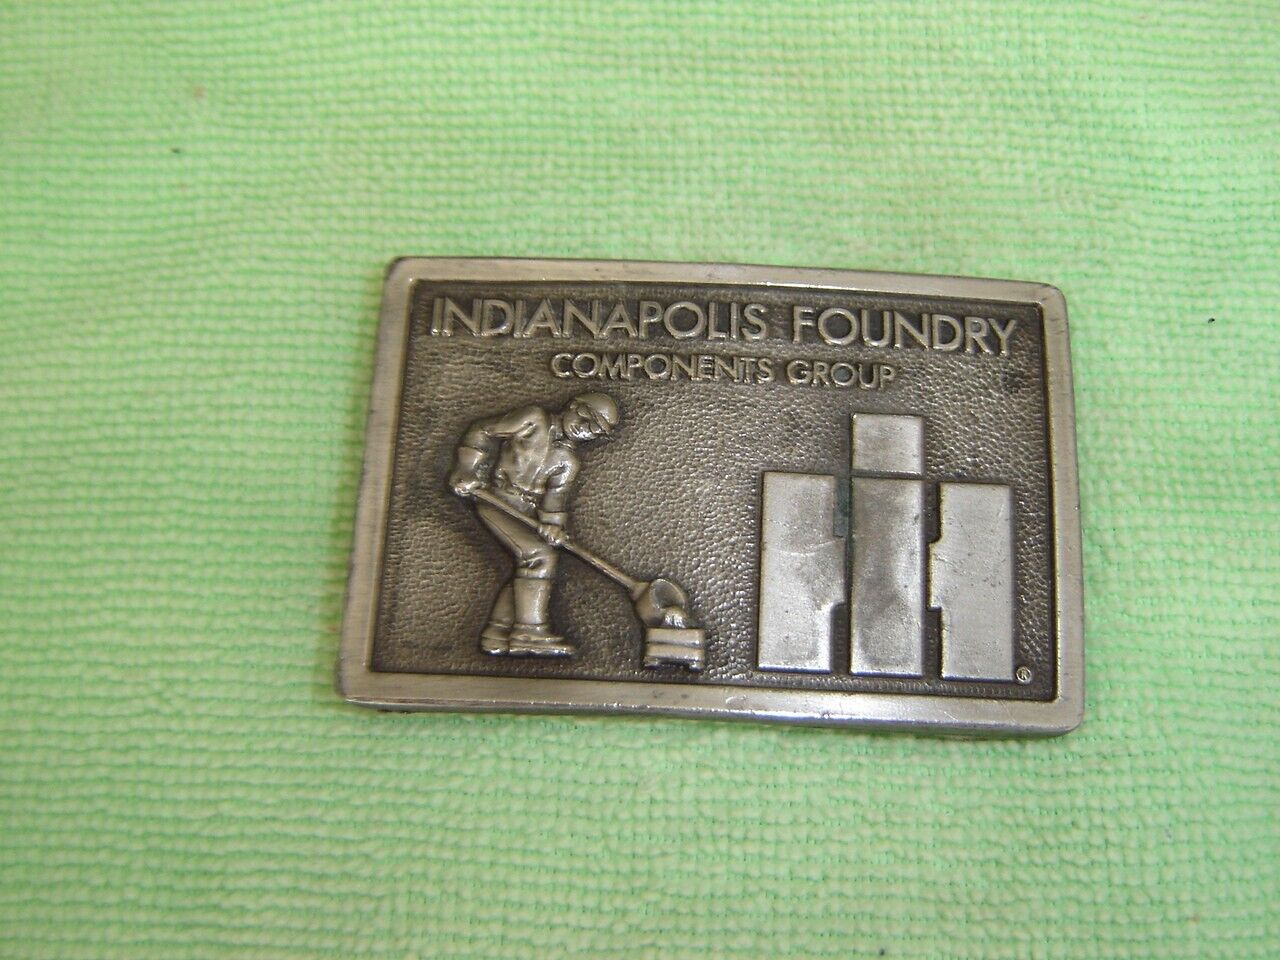 1977 1978 IH International Harvester Belt Buckle Indianapolis Foundry Components